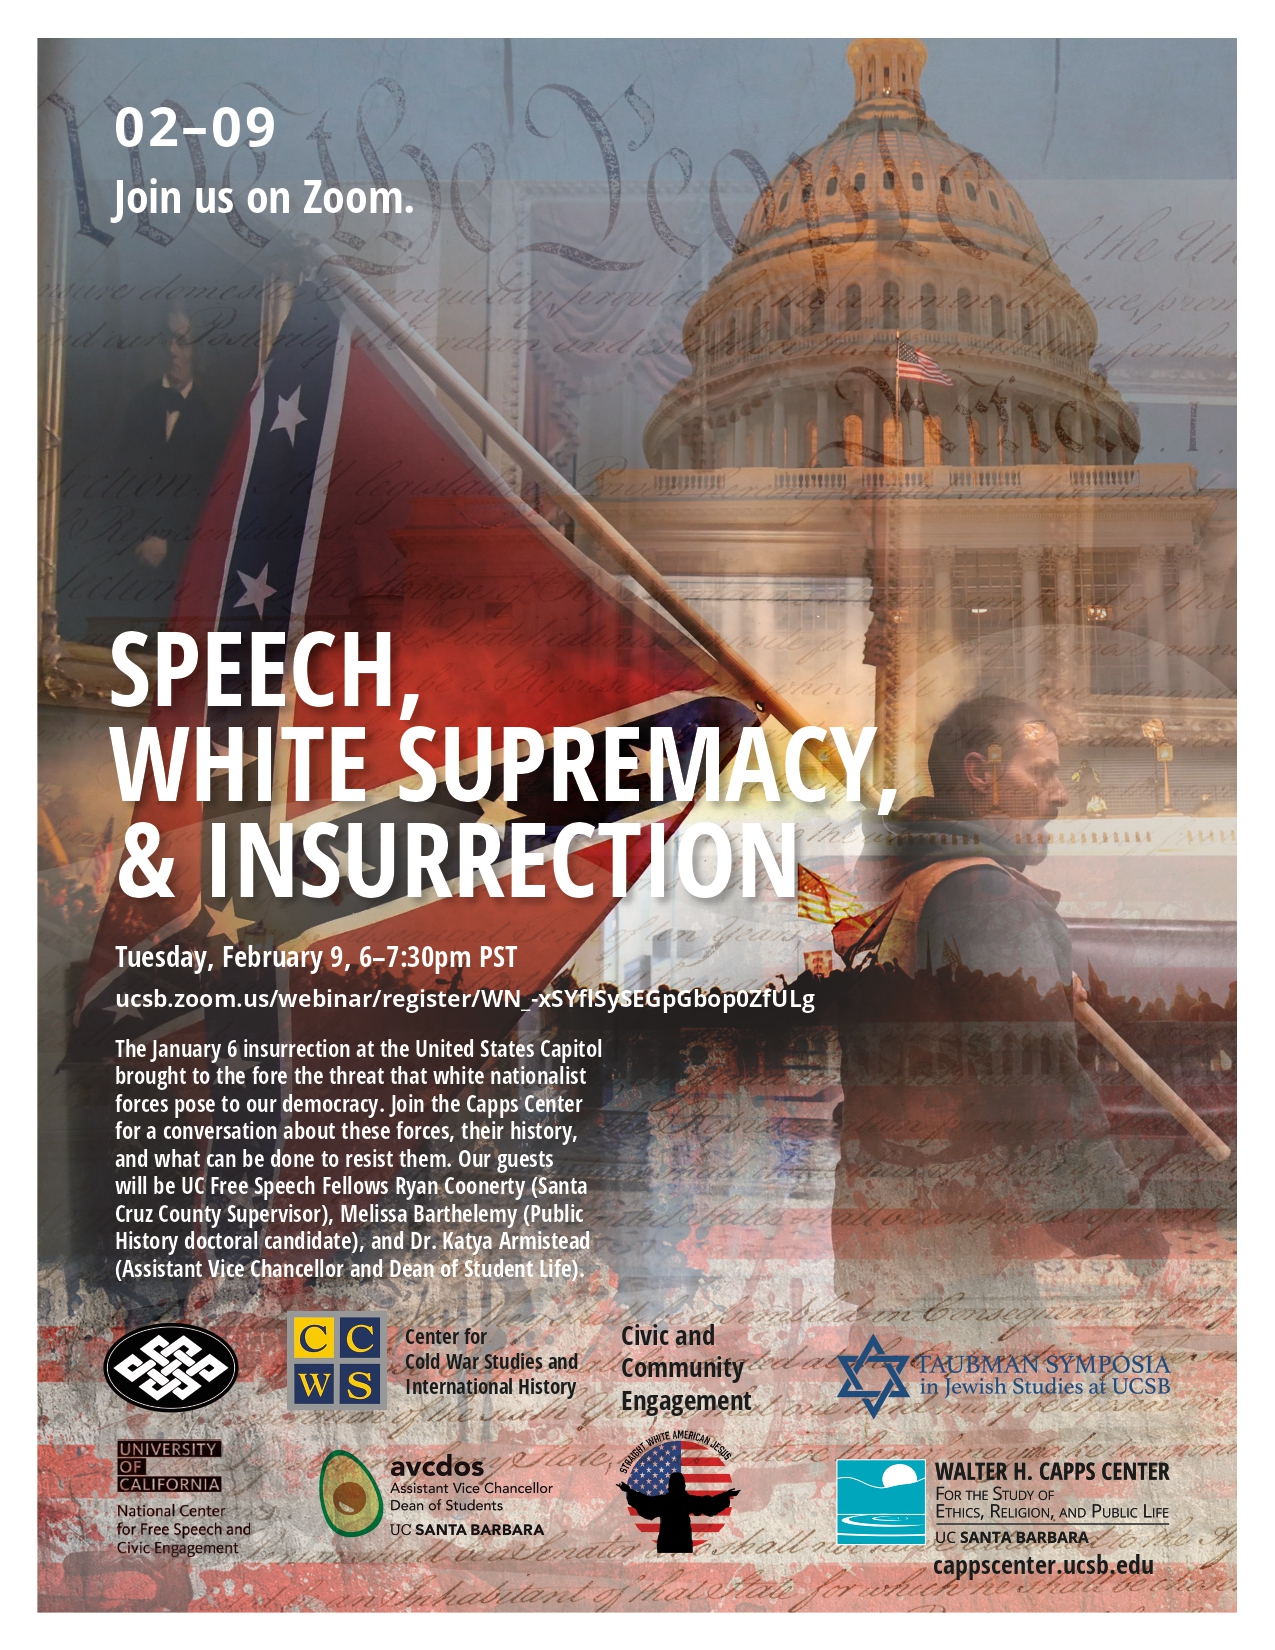 Flyer for Zoom talk: Speech, White Supremacy, & Insurrection on 2/9/21 from 6-7:30PM